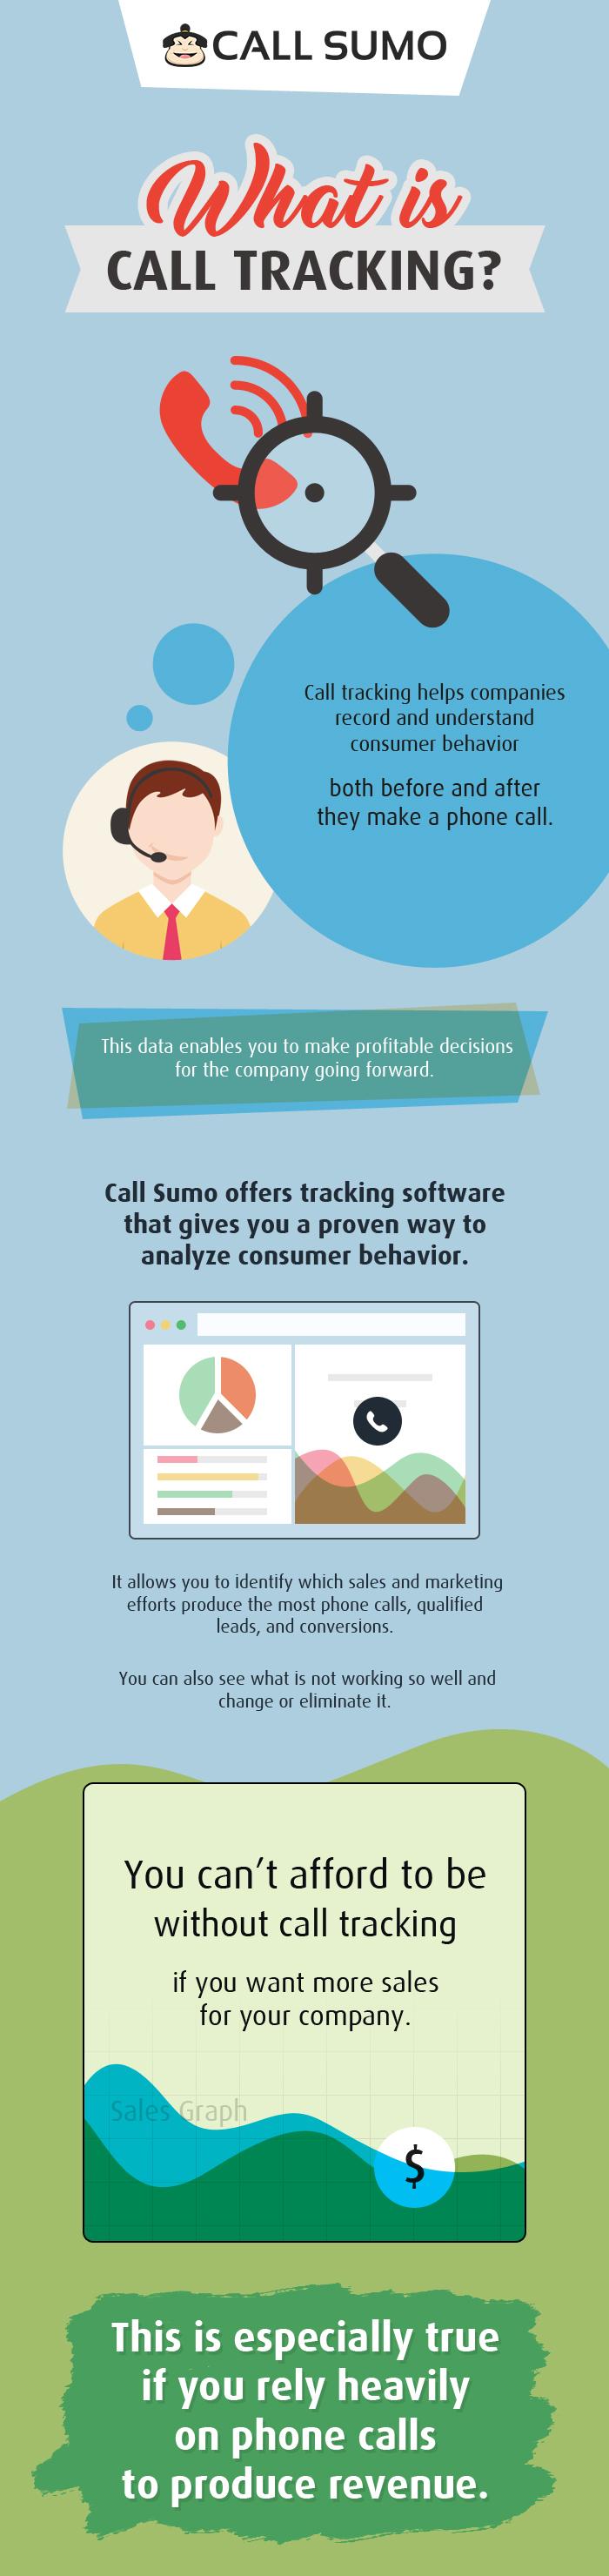 Try Call Sumo to Track Online & Offline Advertising Calls